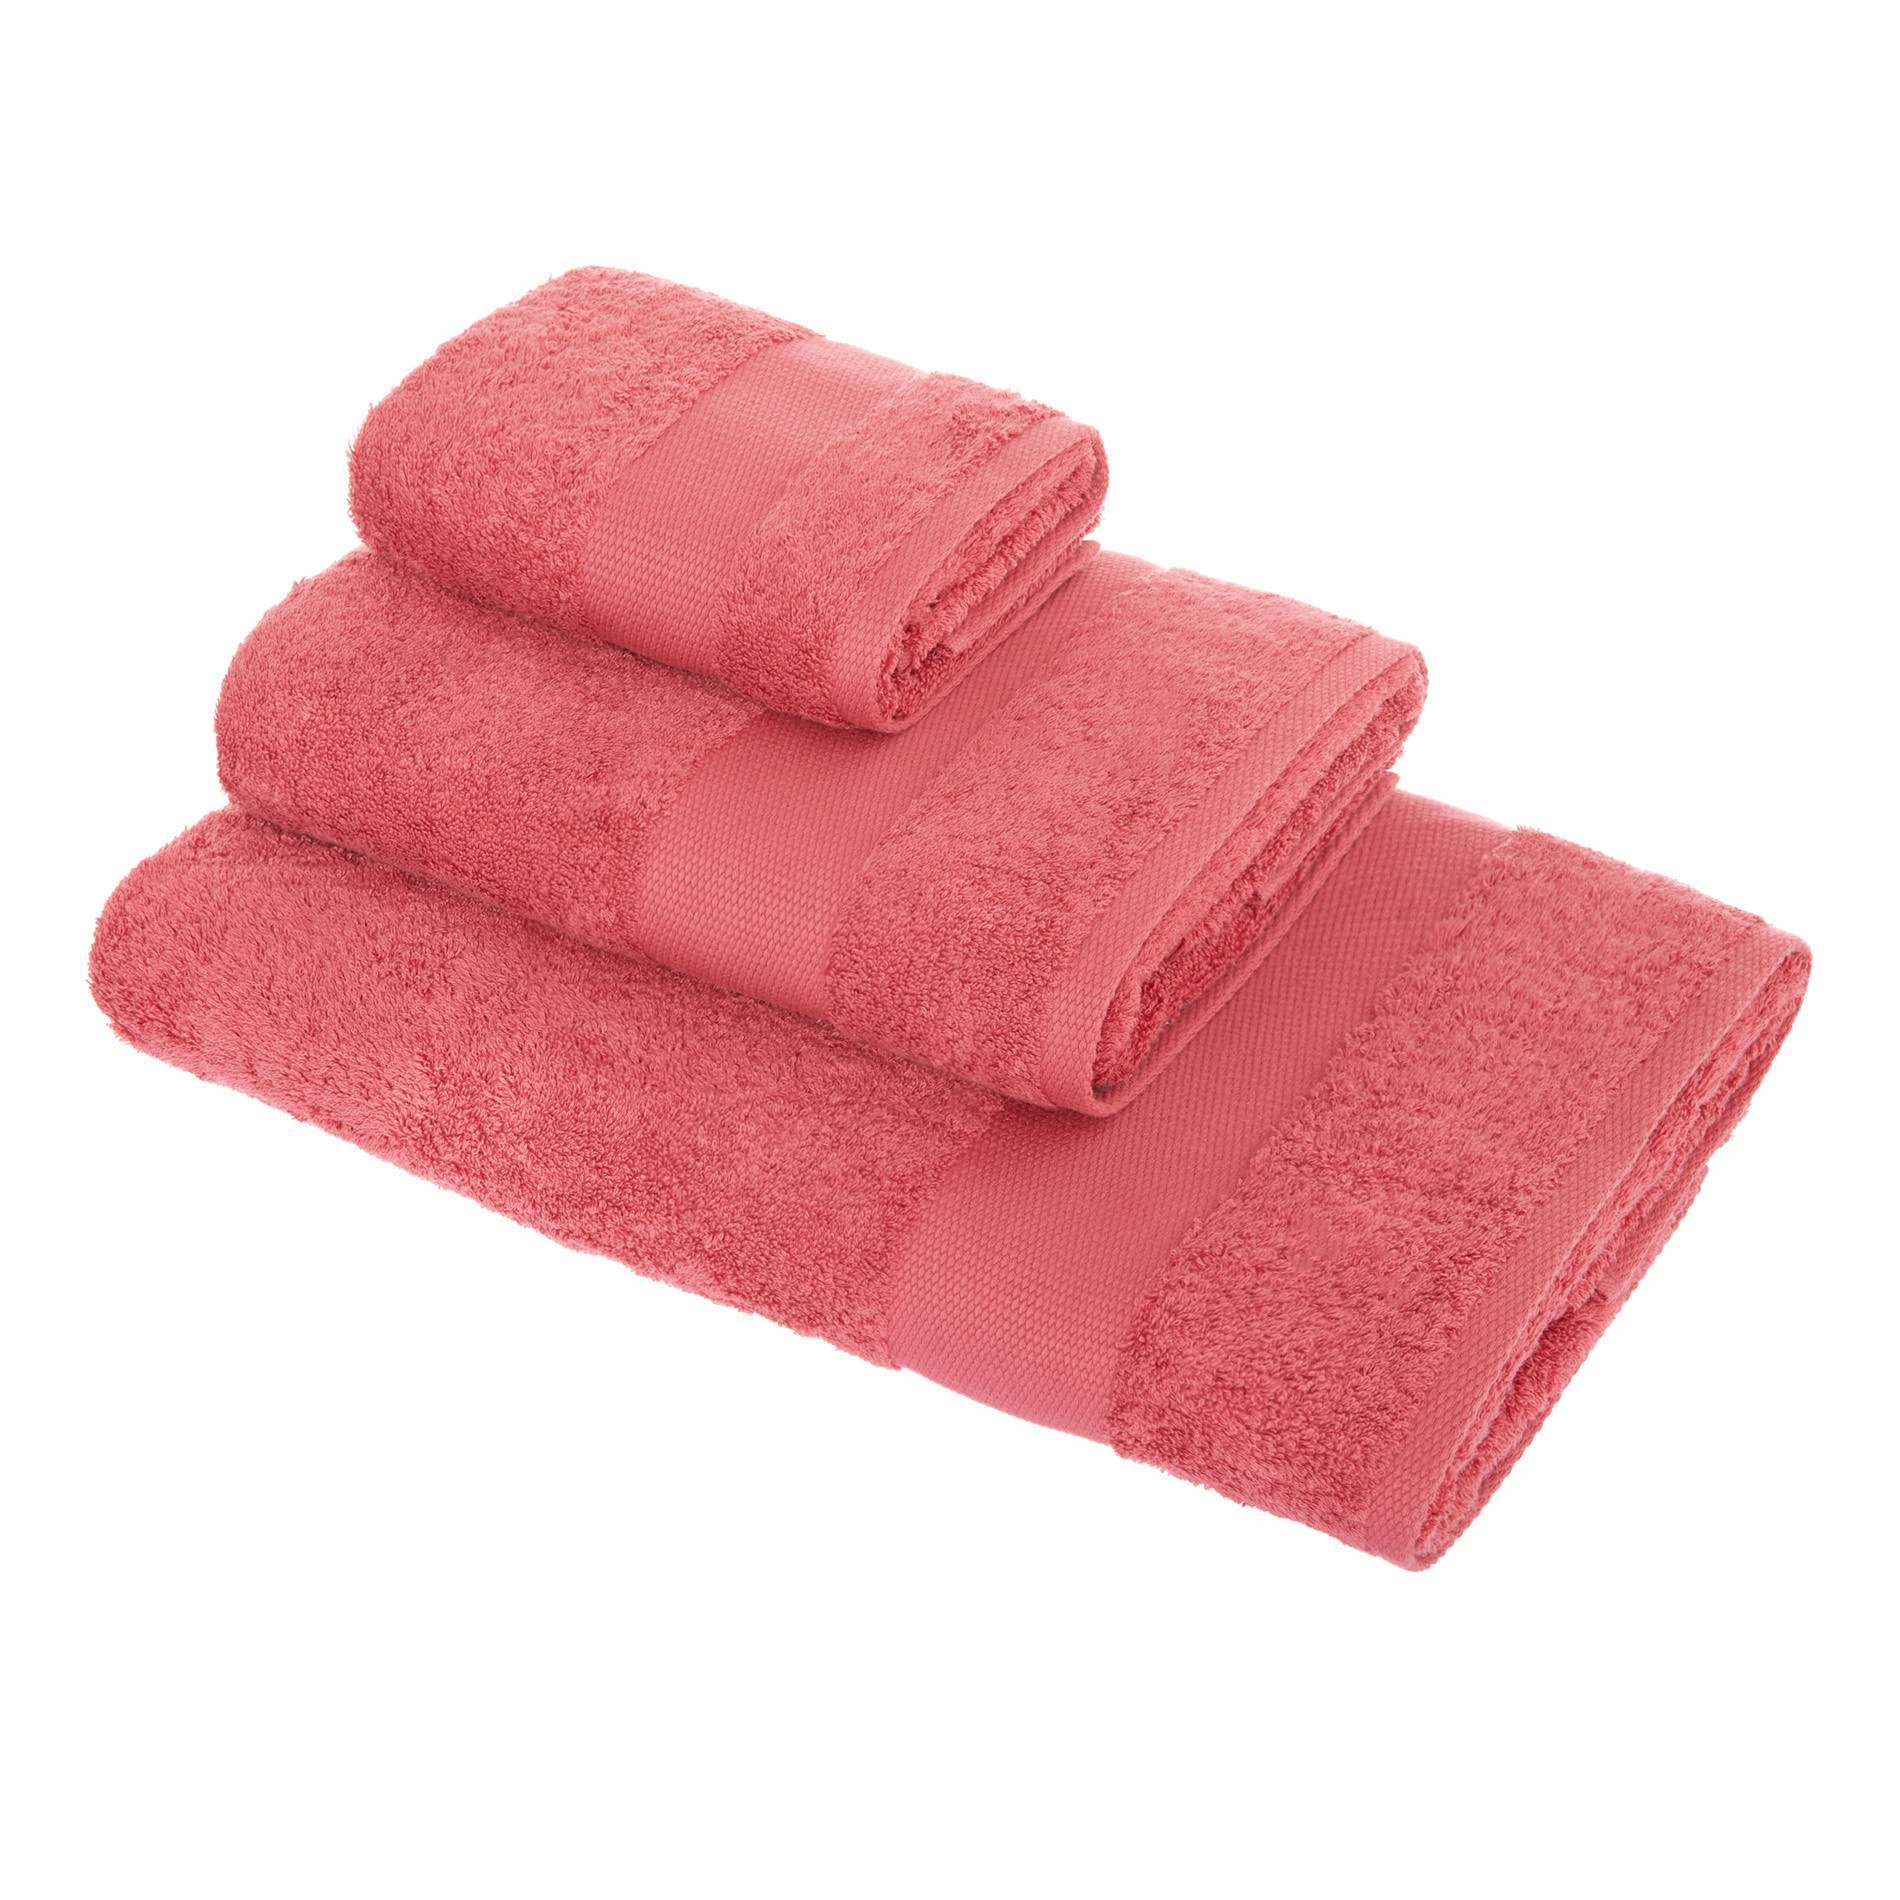 Zefiro pure cotton terry towel, Strawberry Red, large